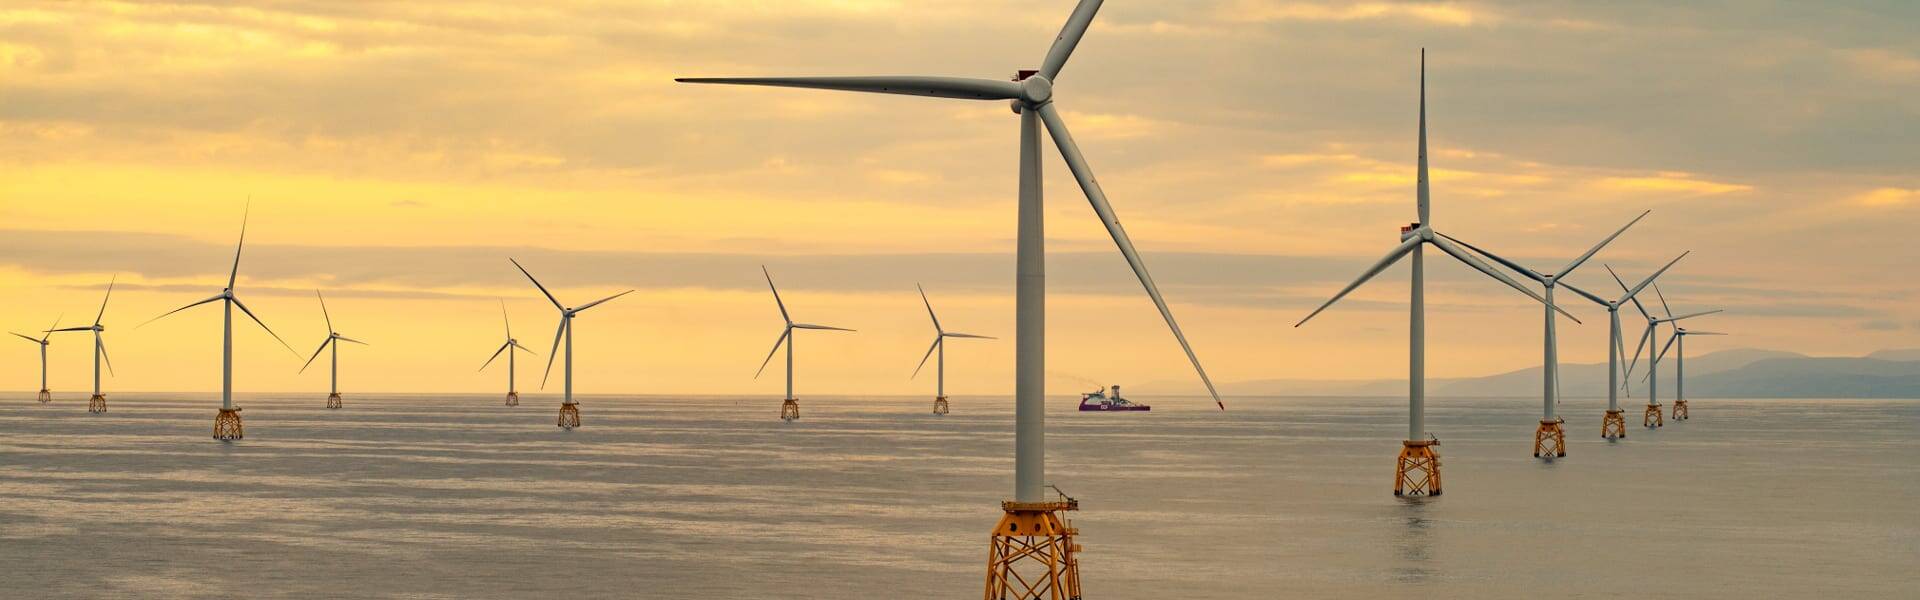 Equinor signs seabed lease agreements for offshore wind extensions